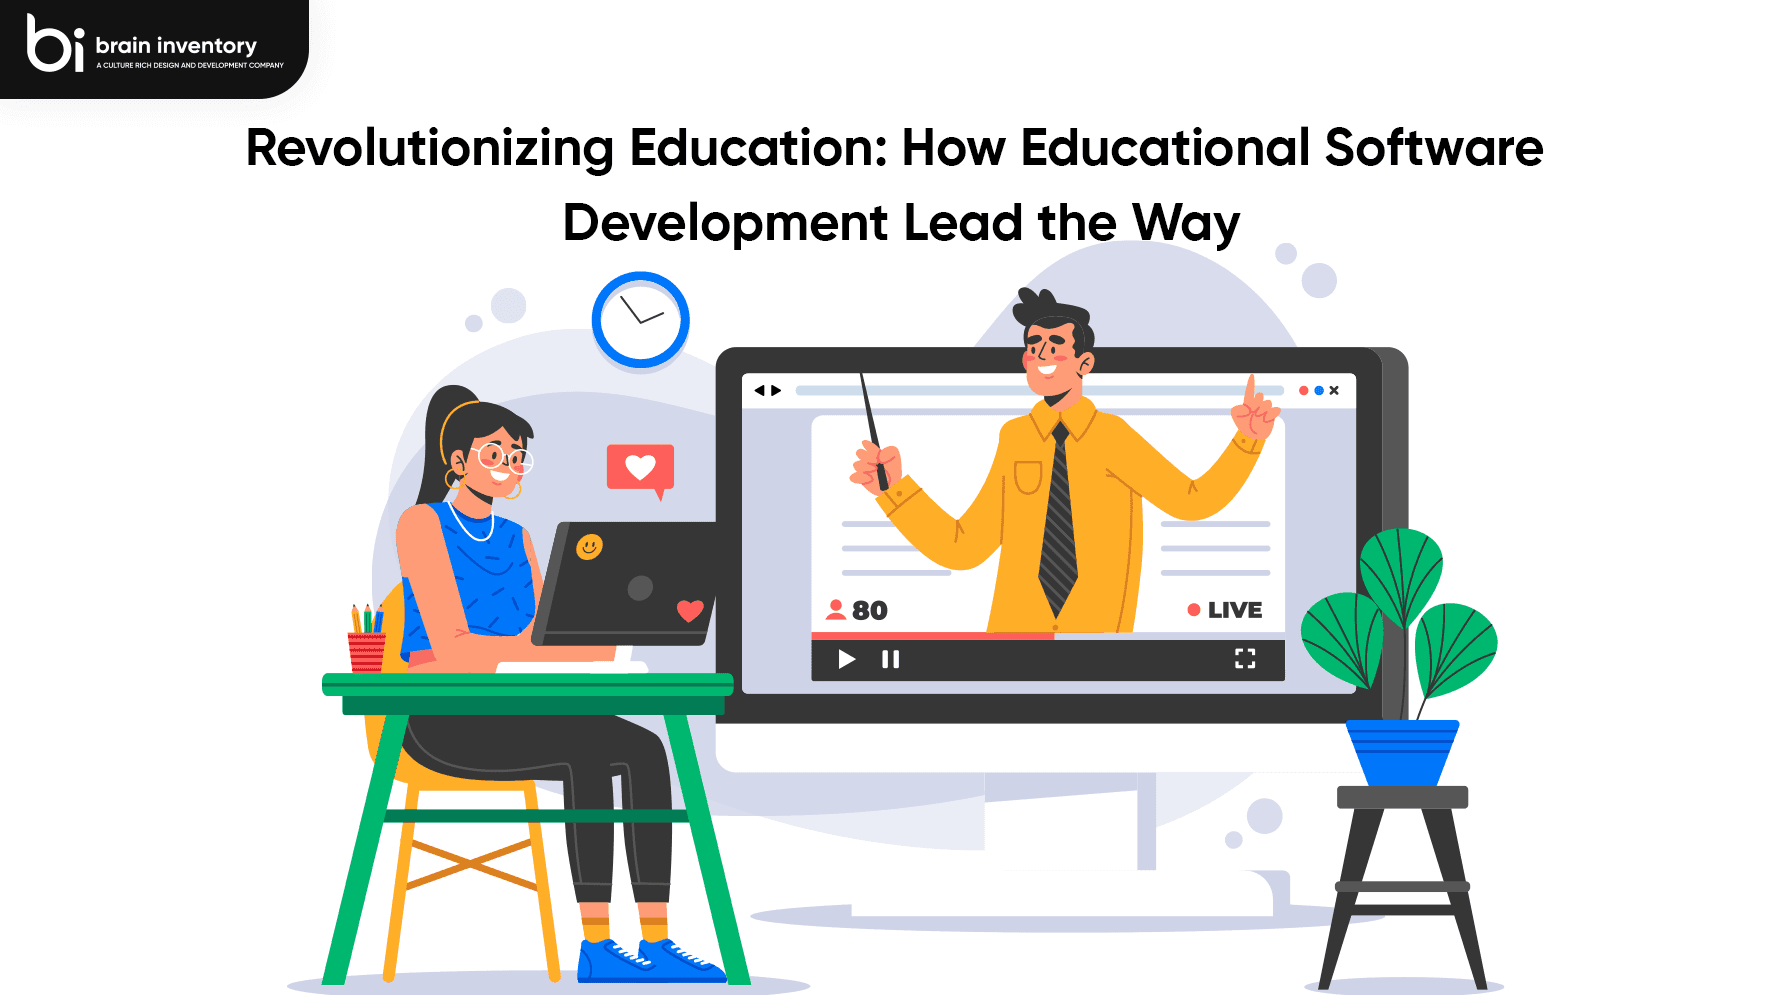 Revolutionizing Education: How Educational Software Development Lead the Way